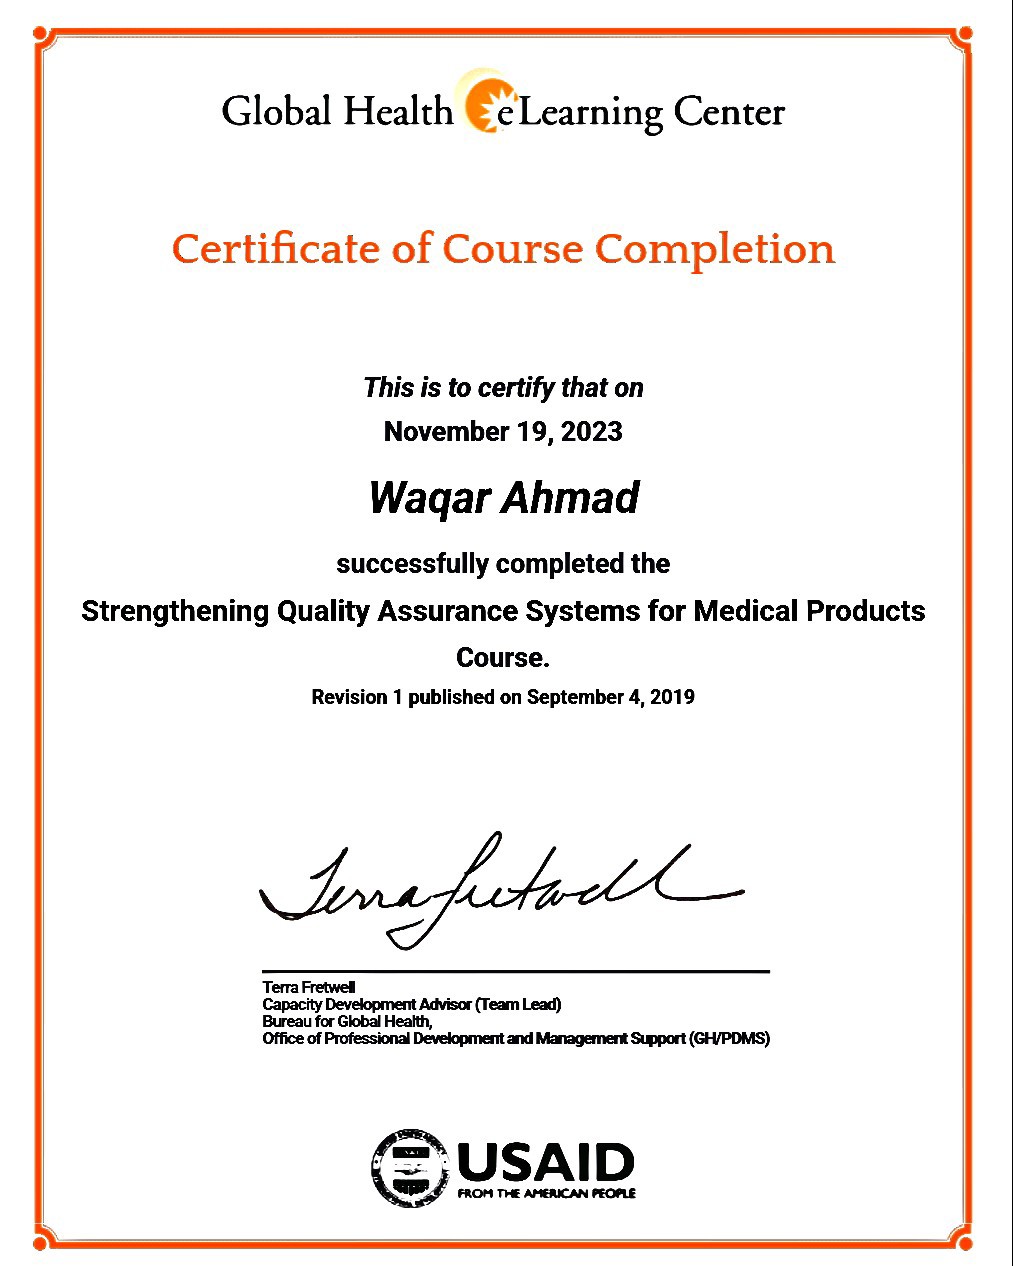 Global Health € Learning Center
Certificate of Course Completion

This is to certify that on
November 19, 2023

Waqar Ahmad

successfully completed the
Strengthening Quality Assurance Systems for Medical Products

Course.
Revision 1 published on September 4, 2019

Tina Sots

Tera Fretwed

Capactty Development Advisor (Tearn Lead)

Bureau for Global Health,

Office of Professional Development and Management Support (GH/POMS)

\&amp;/ (= USAID

FROM TE AMERICAN ORE